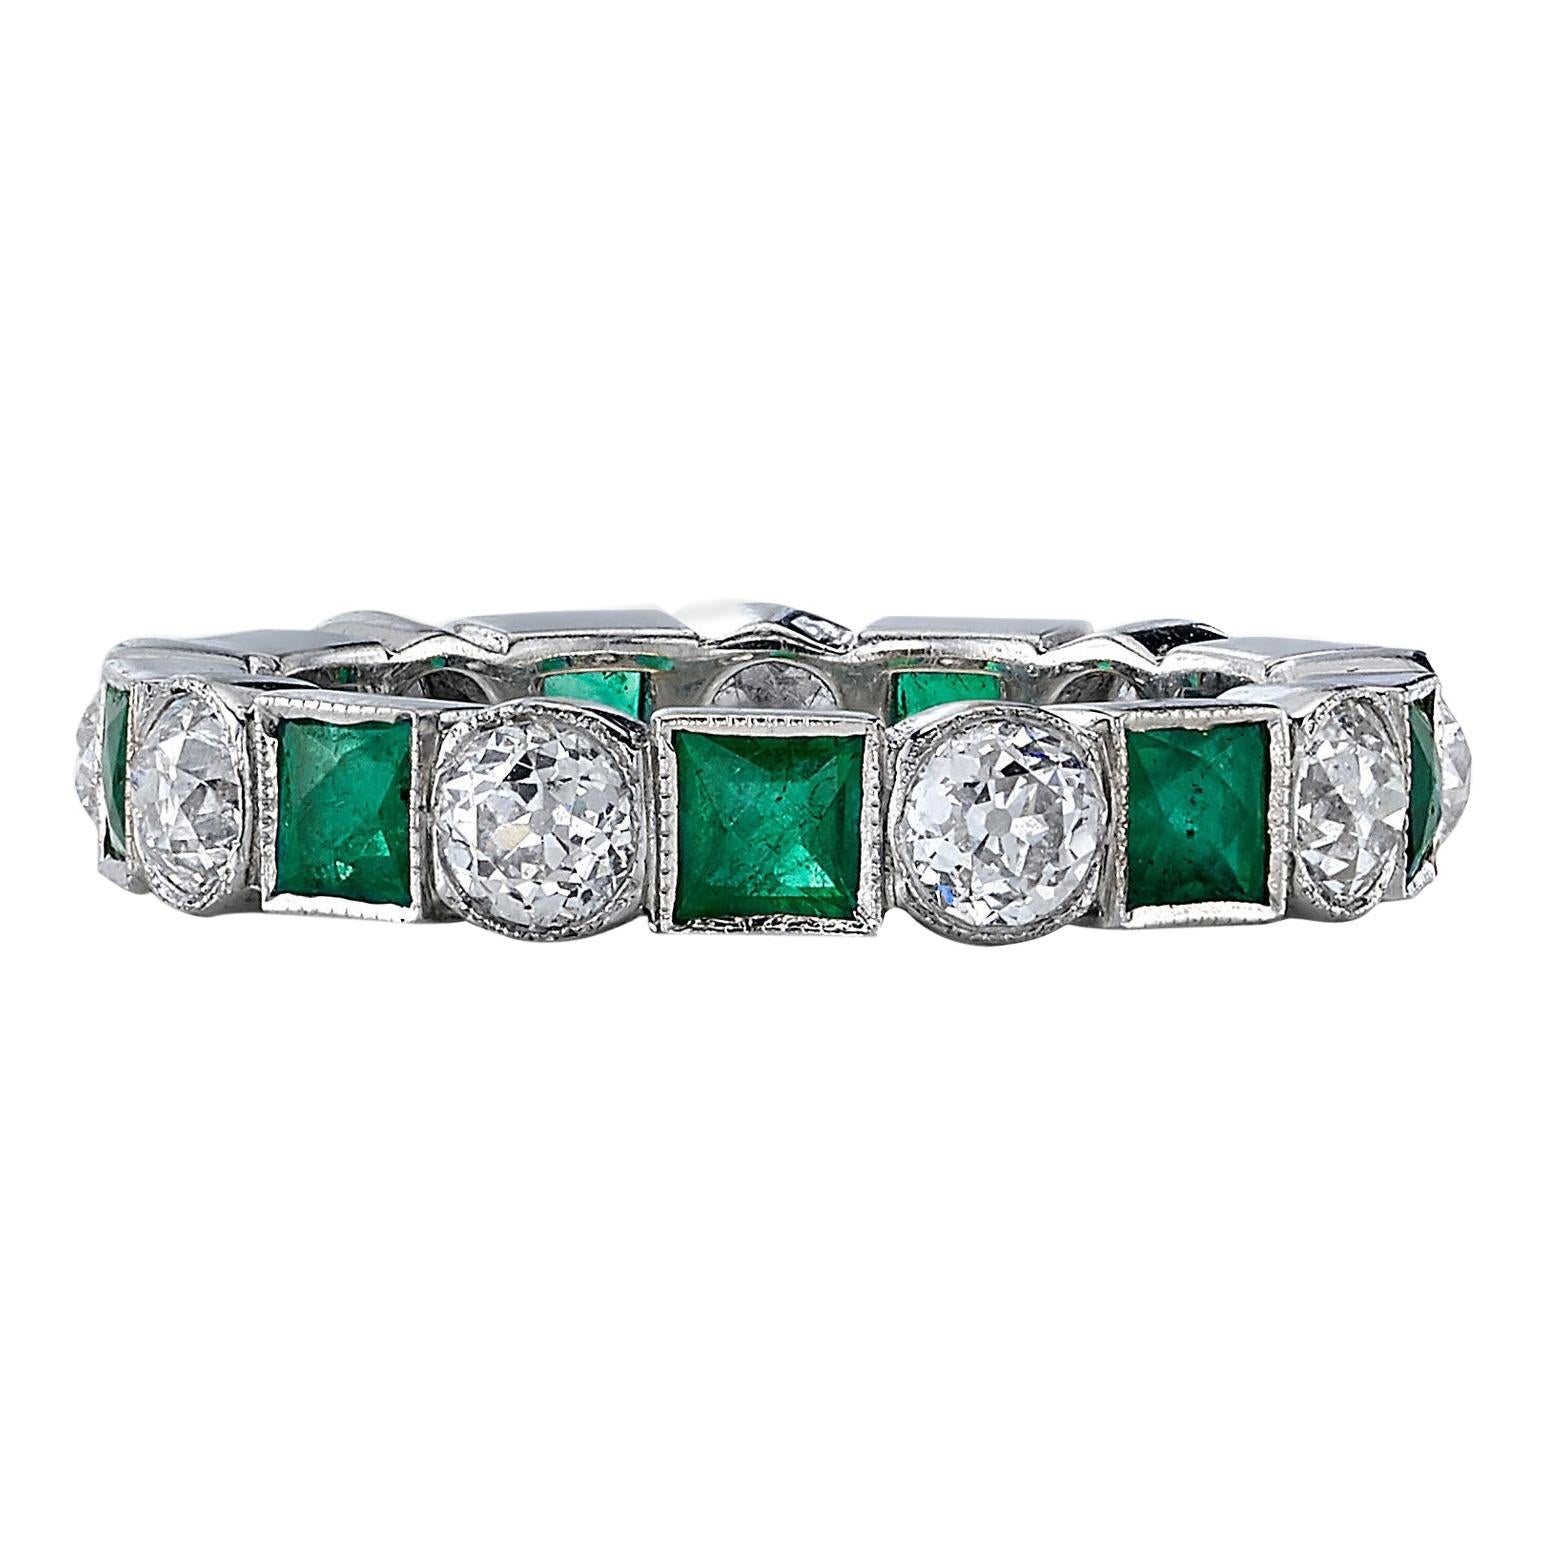 For Sale:  Handcrafted Brecken European Cut Diamond/Square Cut Emerald Band by Single Stone